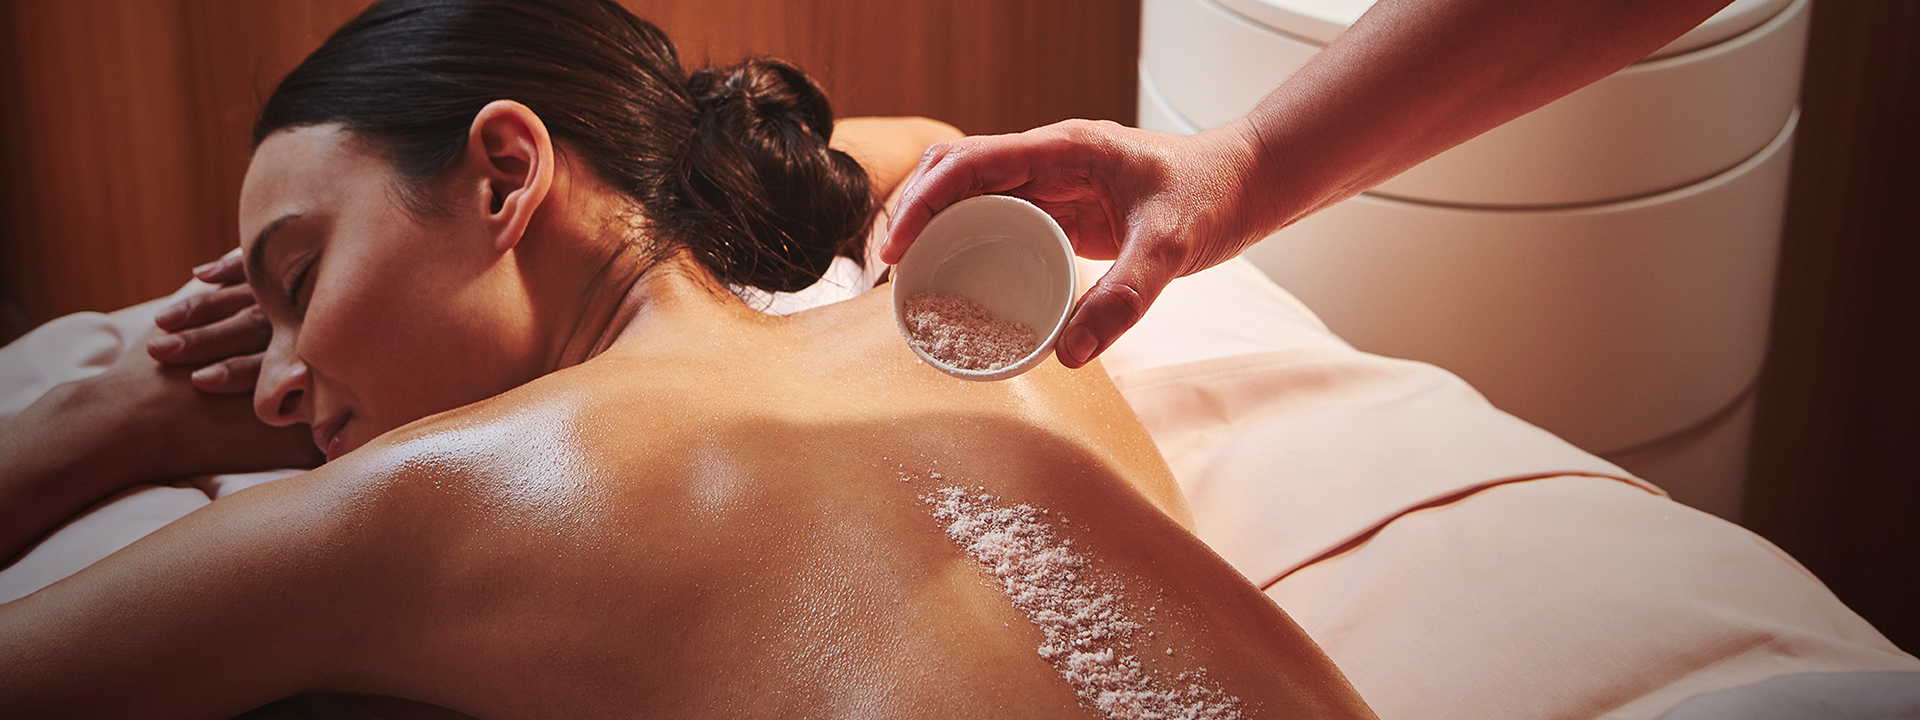 A girl lying in a relaxing La Eva body spa treatment and a hand applying body scrub to her back.